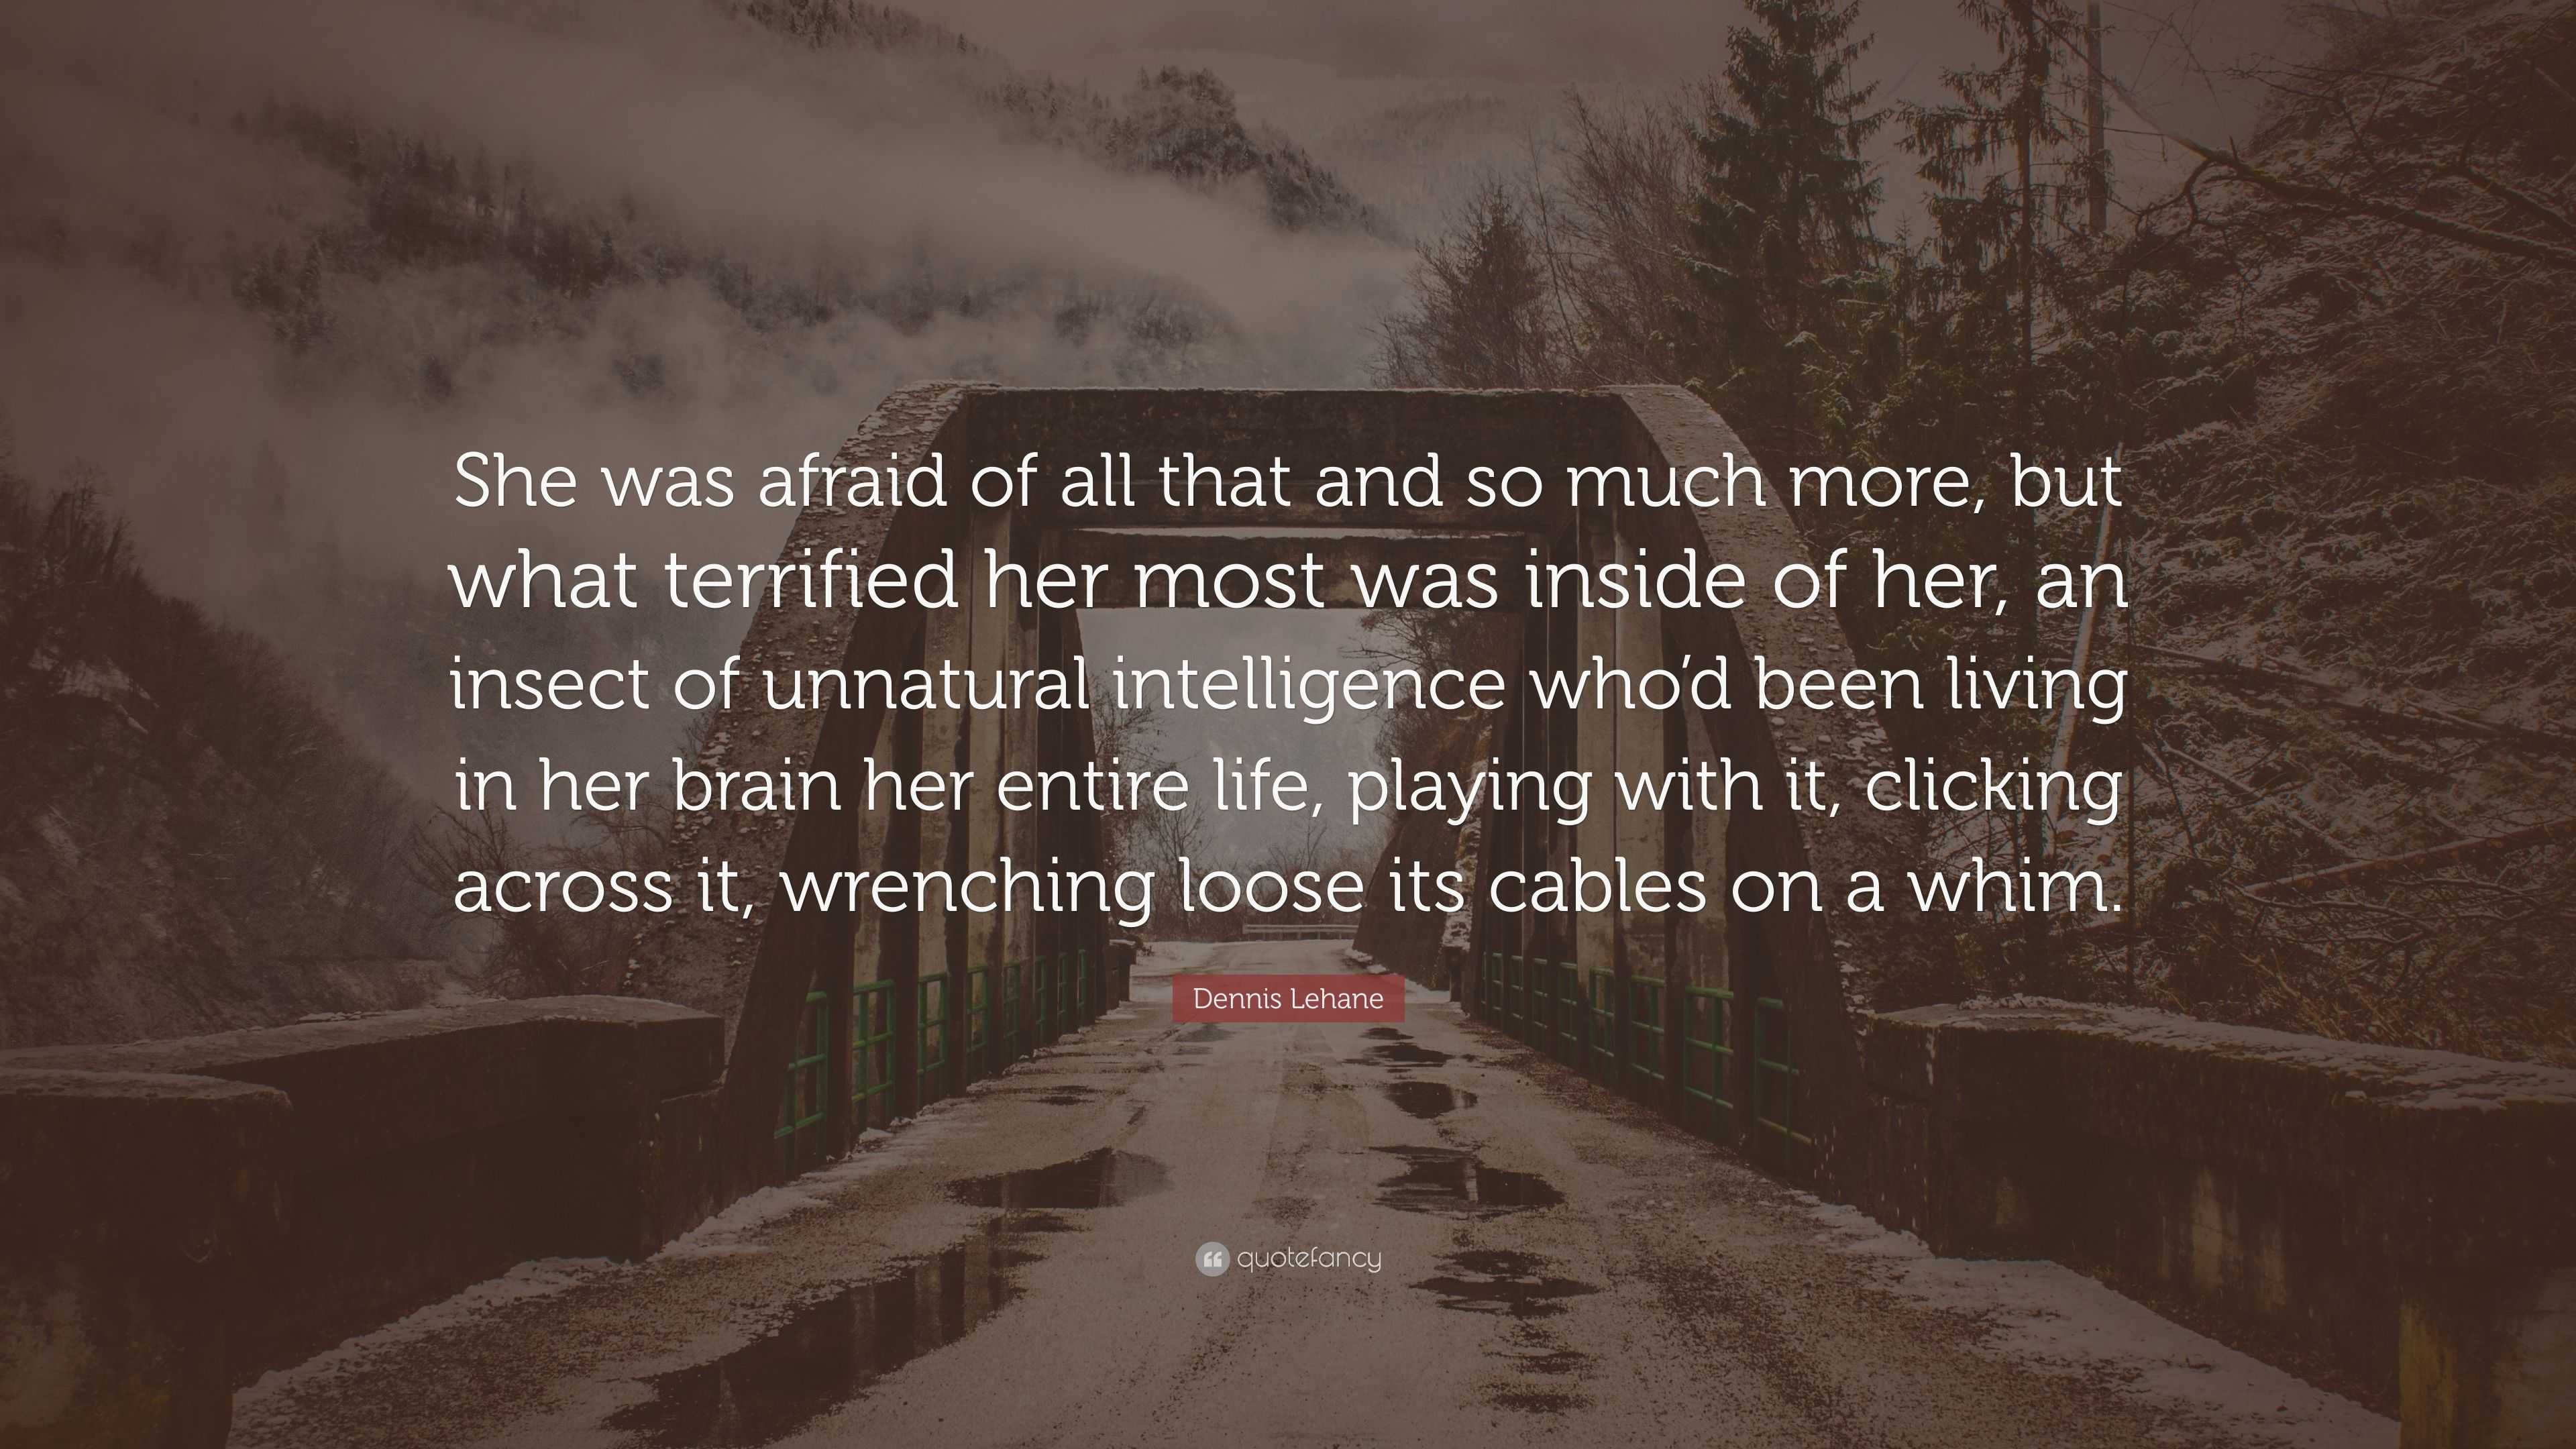 Dennis Lehane Quote: “She was afraid of all that and so much more, but ...